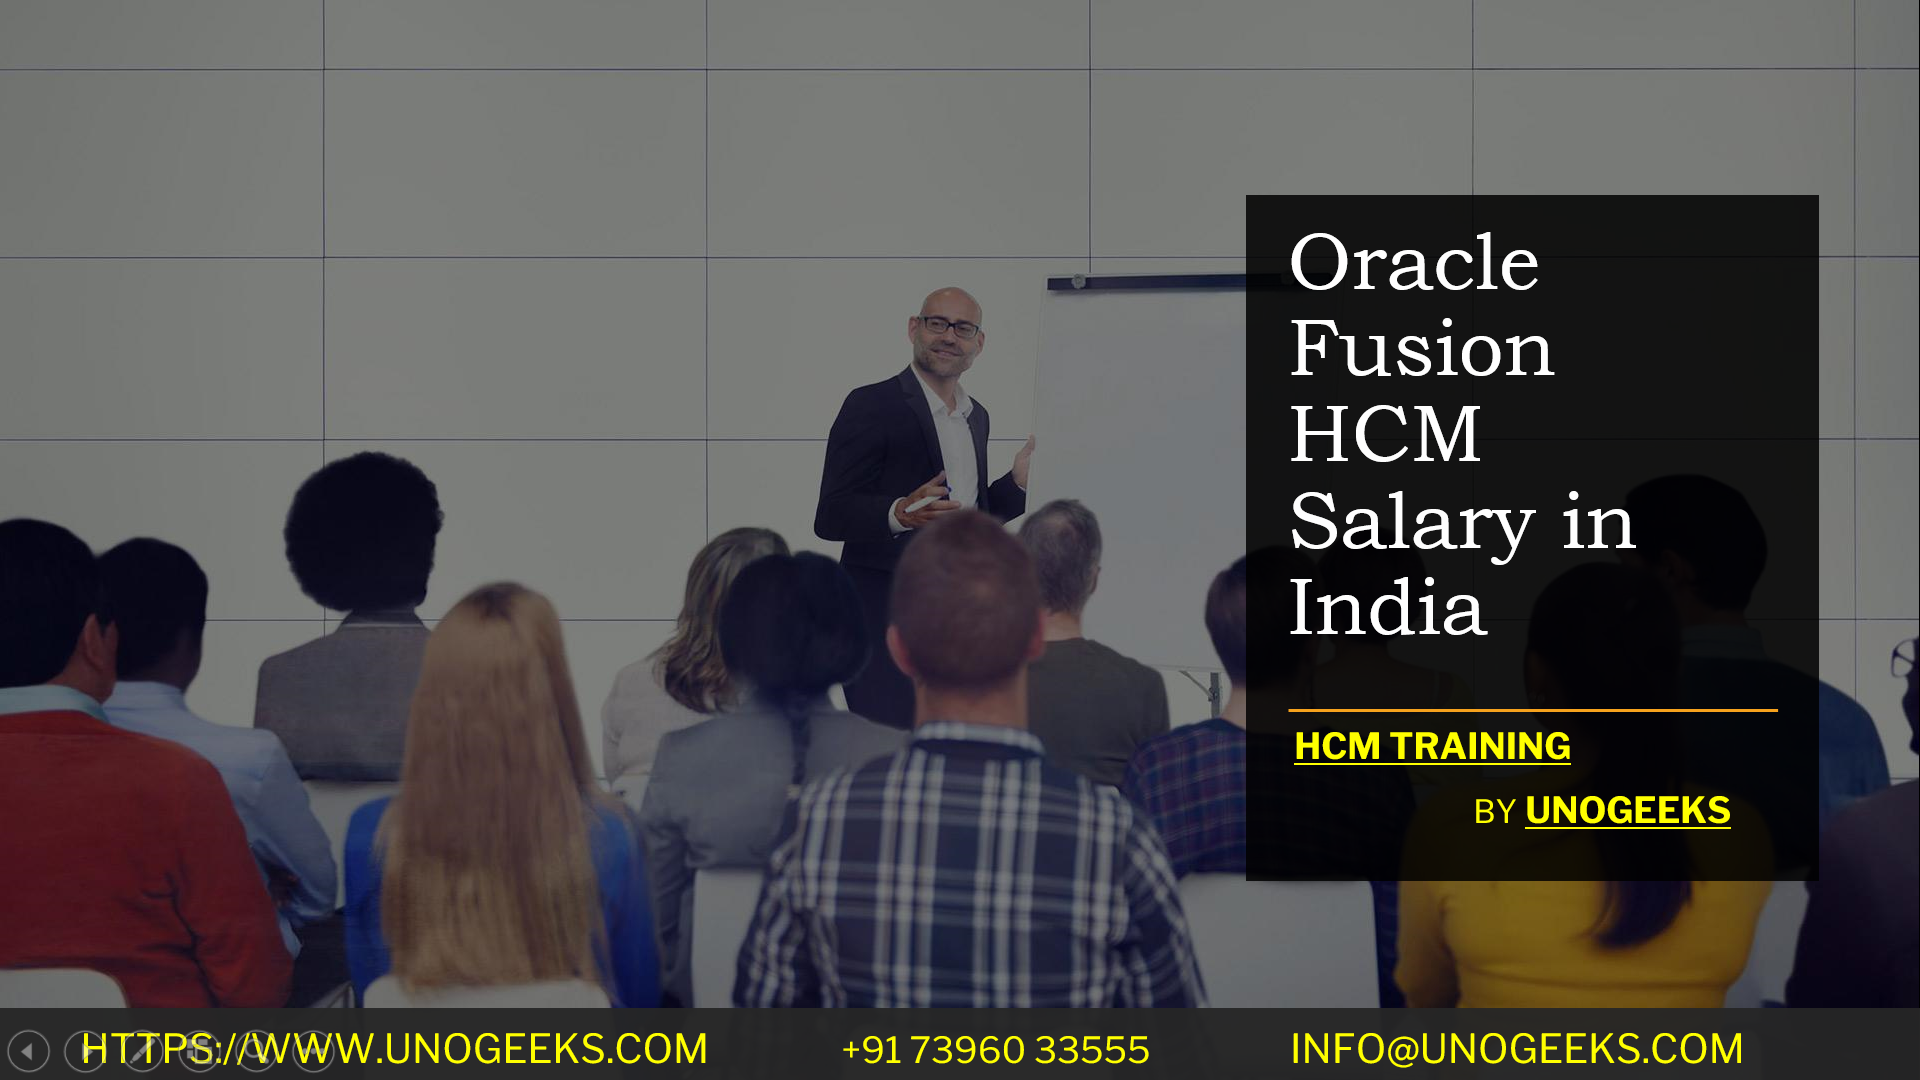 Oracle Fusion HCM Salary in India